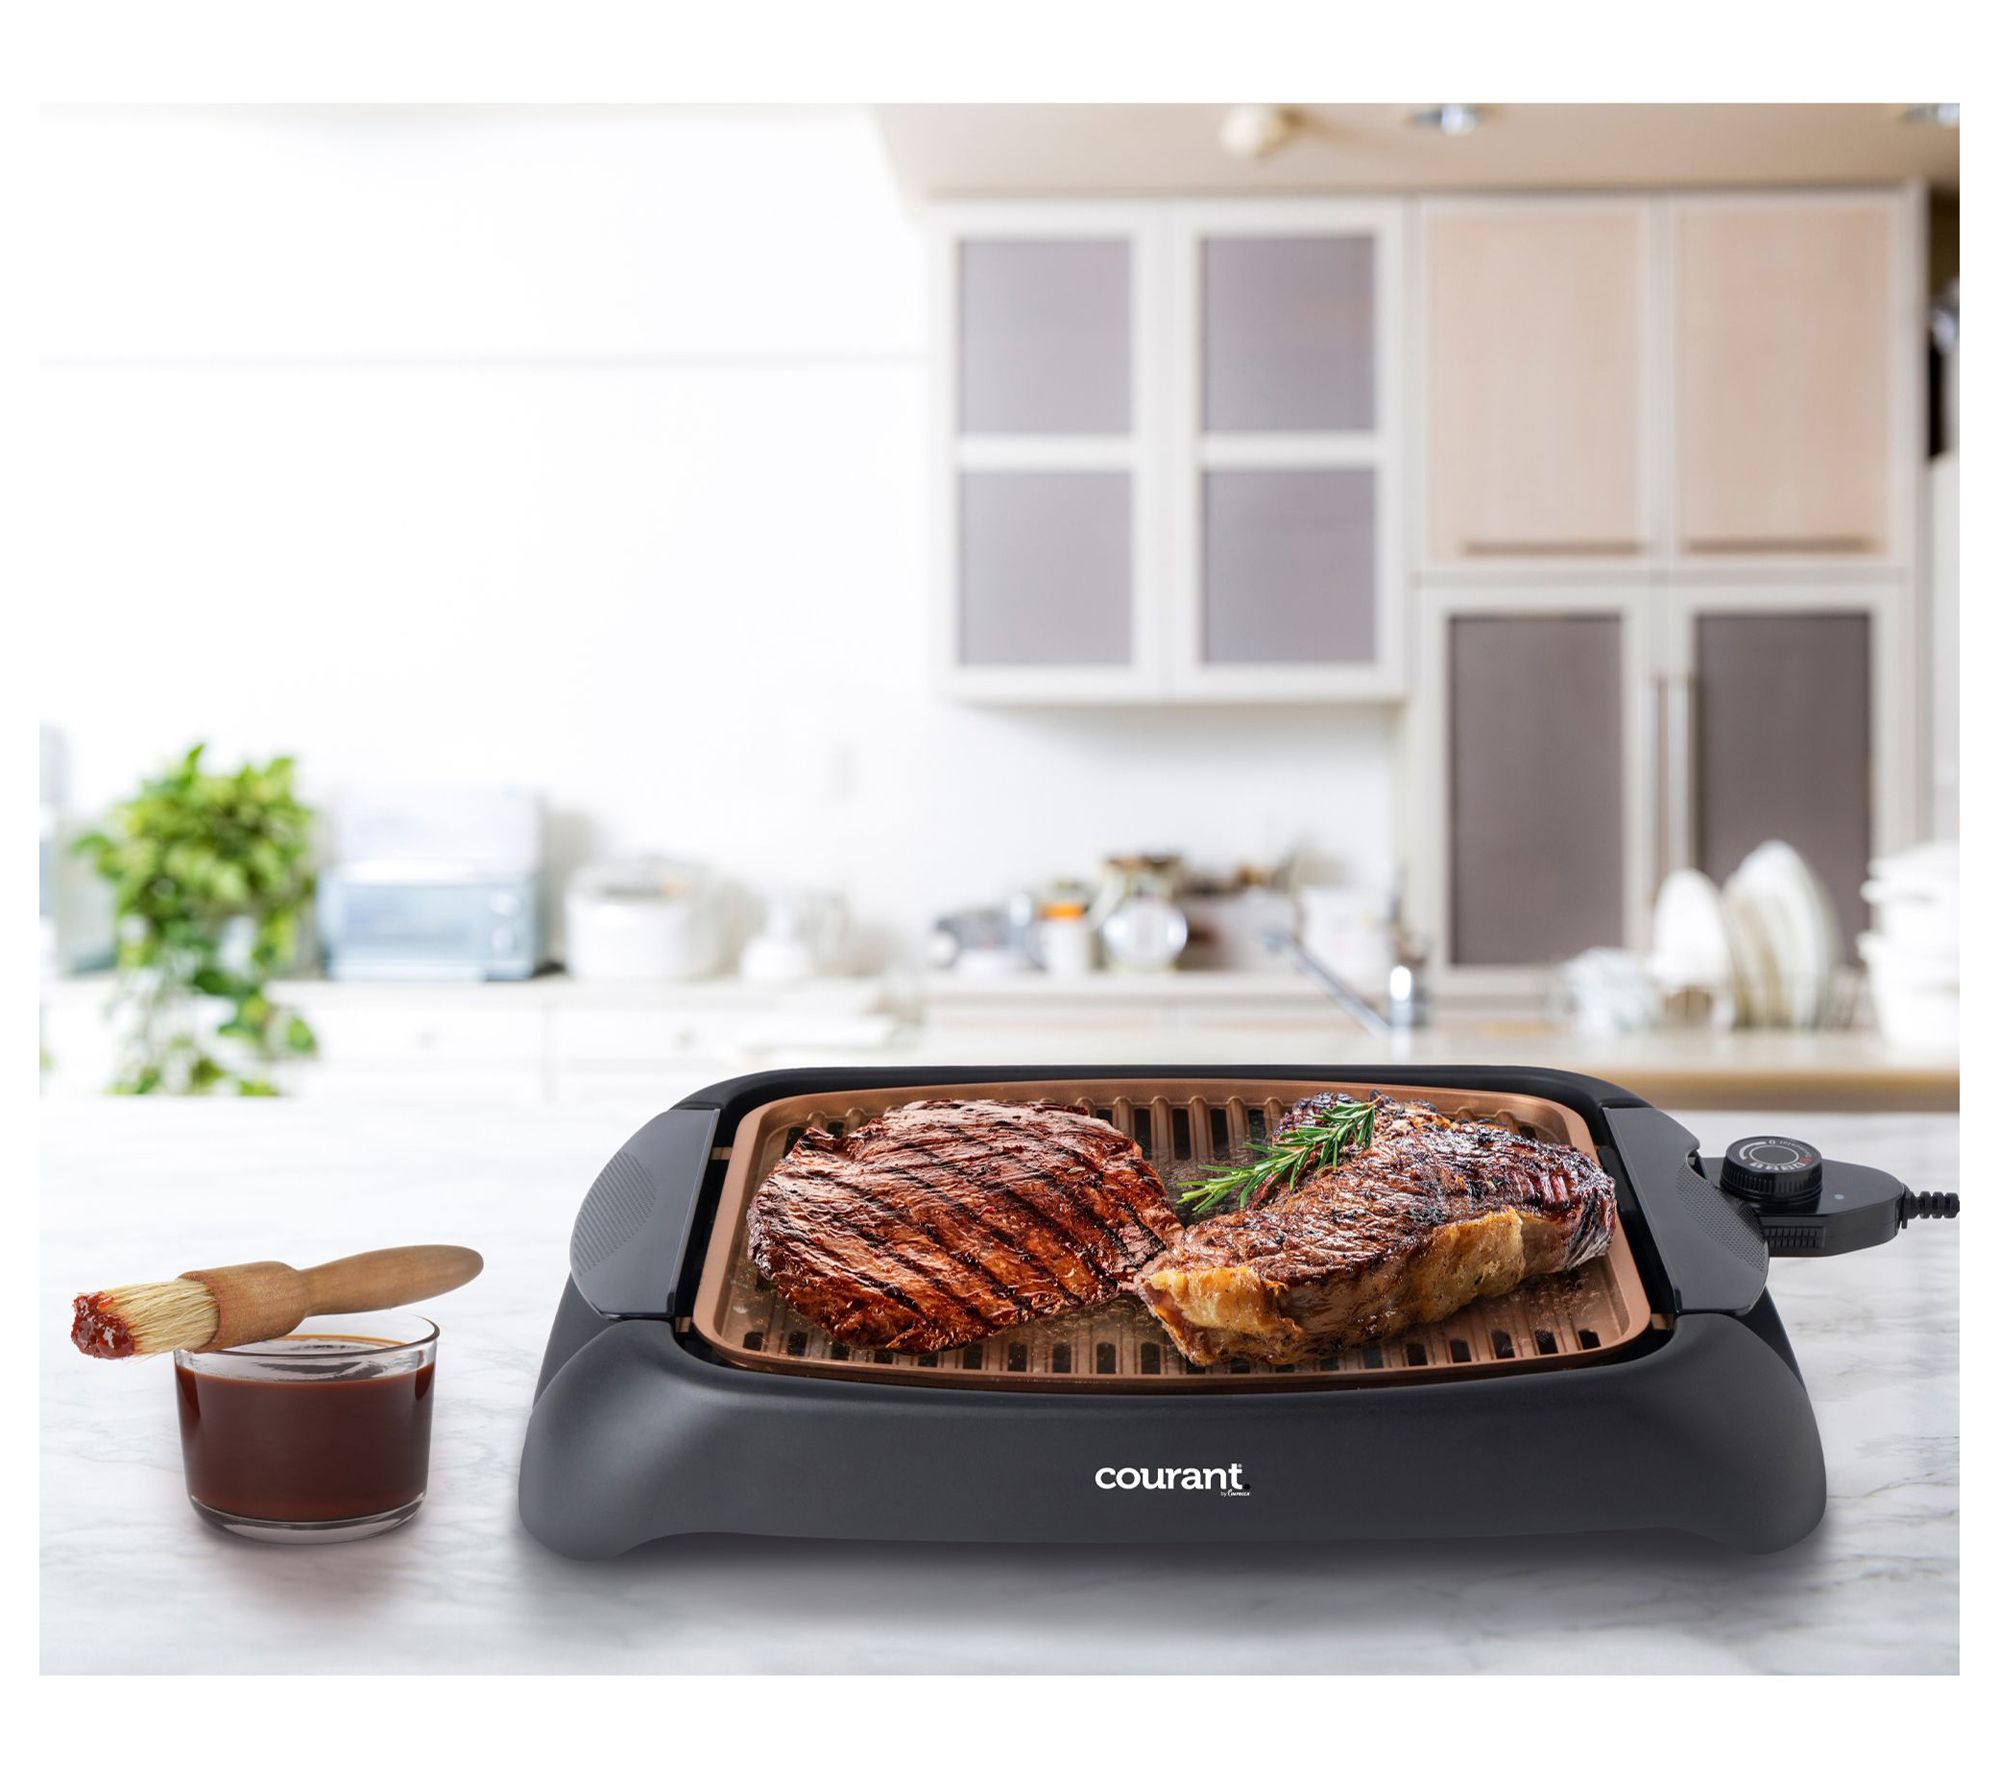 Cooker Review: Delonghi Perfecto Electric Indoor Grill - Grill